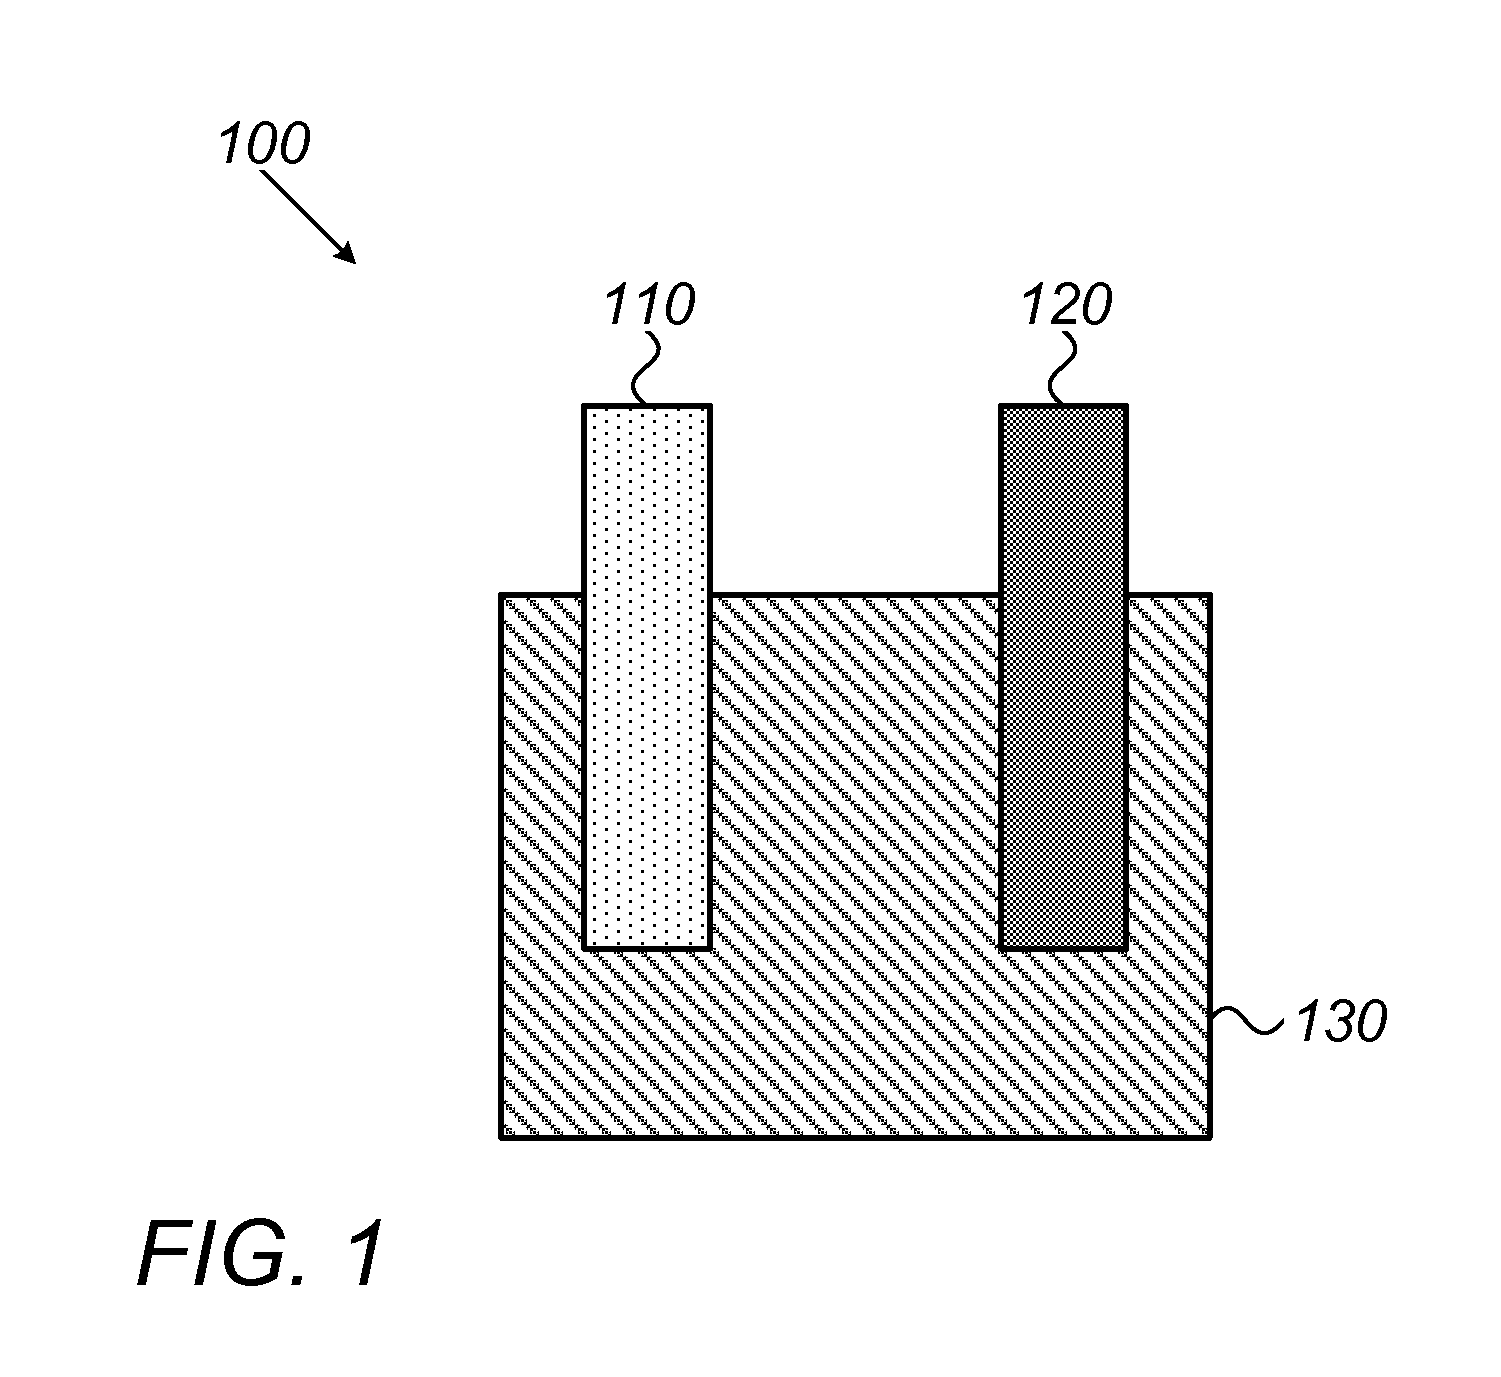 Anodes comprising germanium for lithium-ion devices